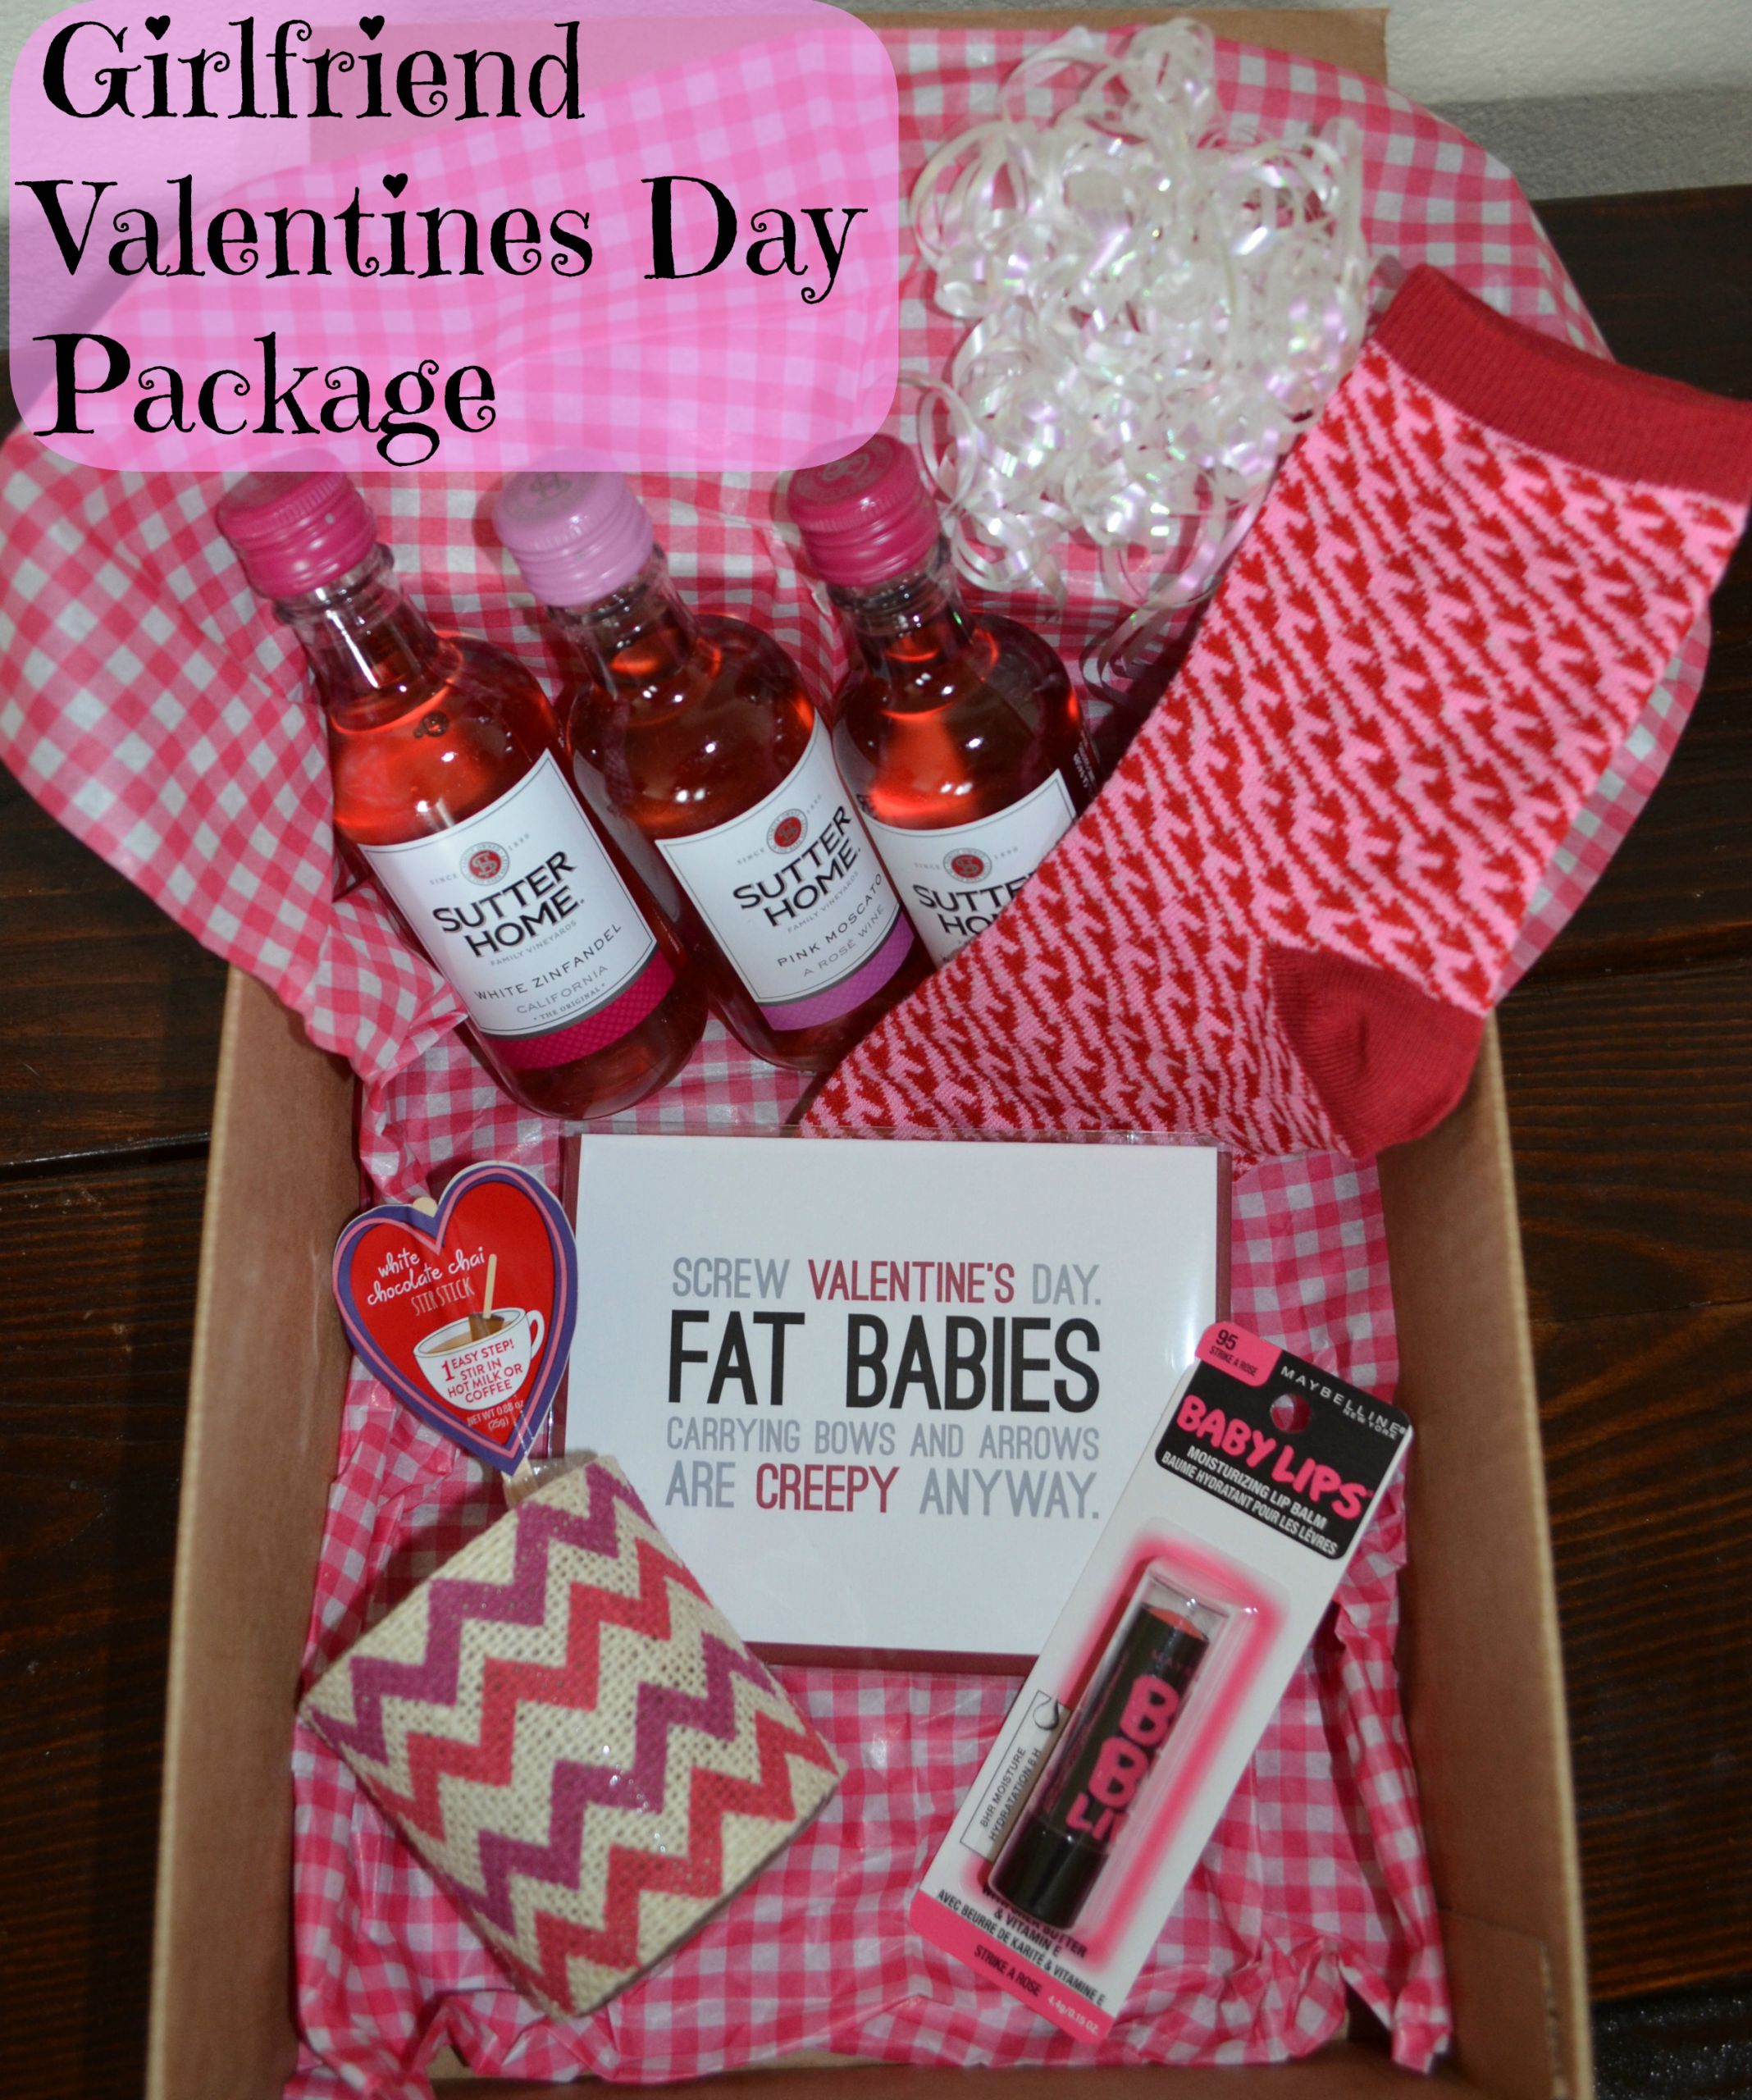 Female Valentine Gift Ideas
 24 ADORABLE GIFT IDEAS FOR THE WOMEN IN YOUR LIFE